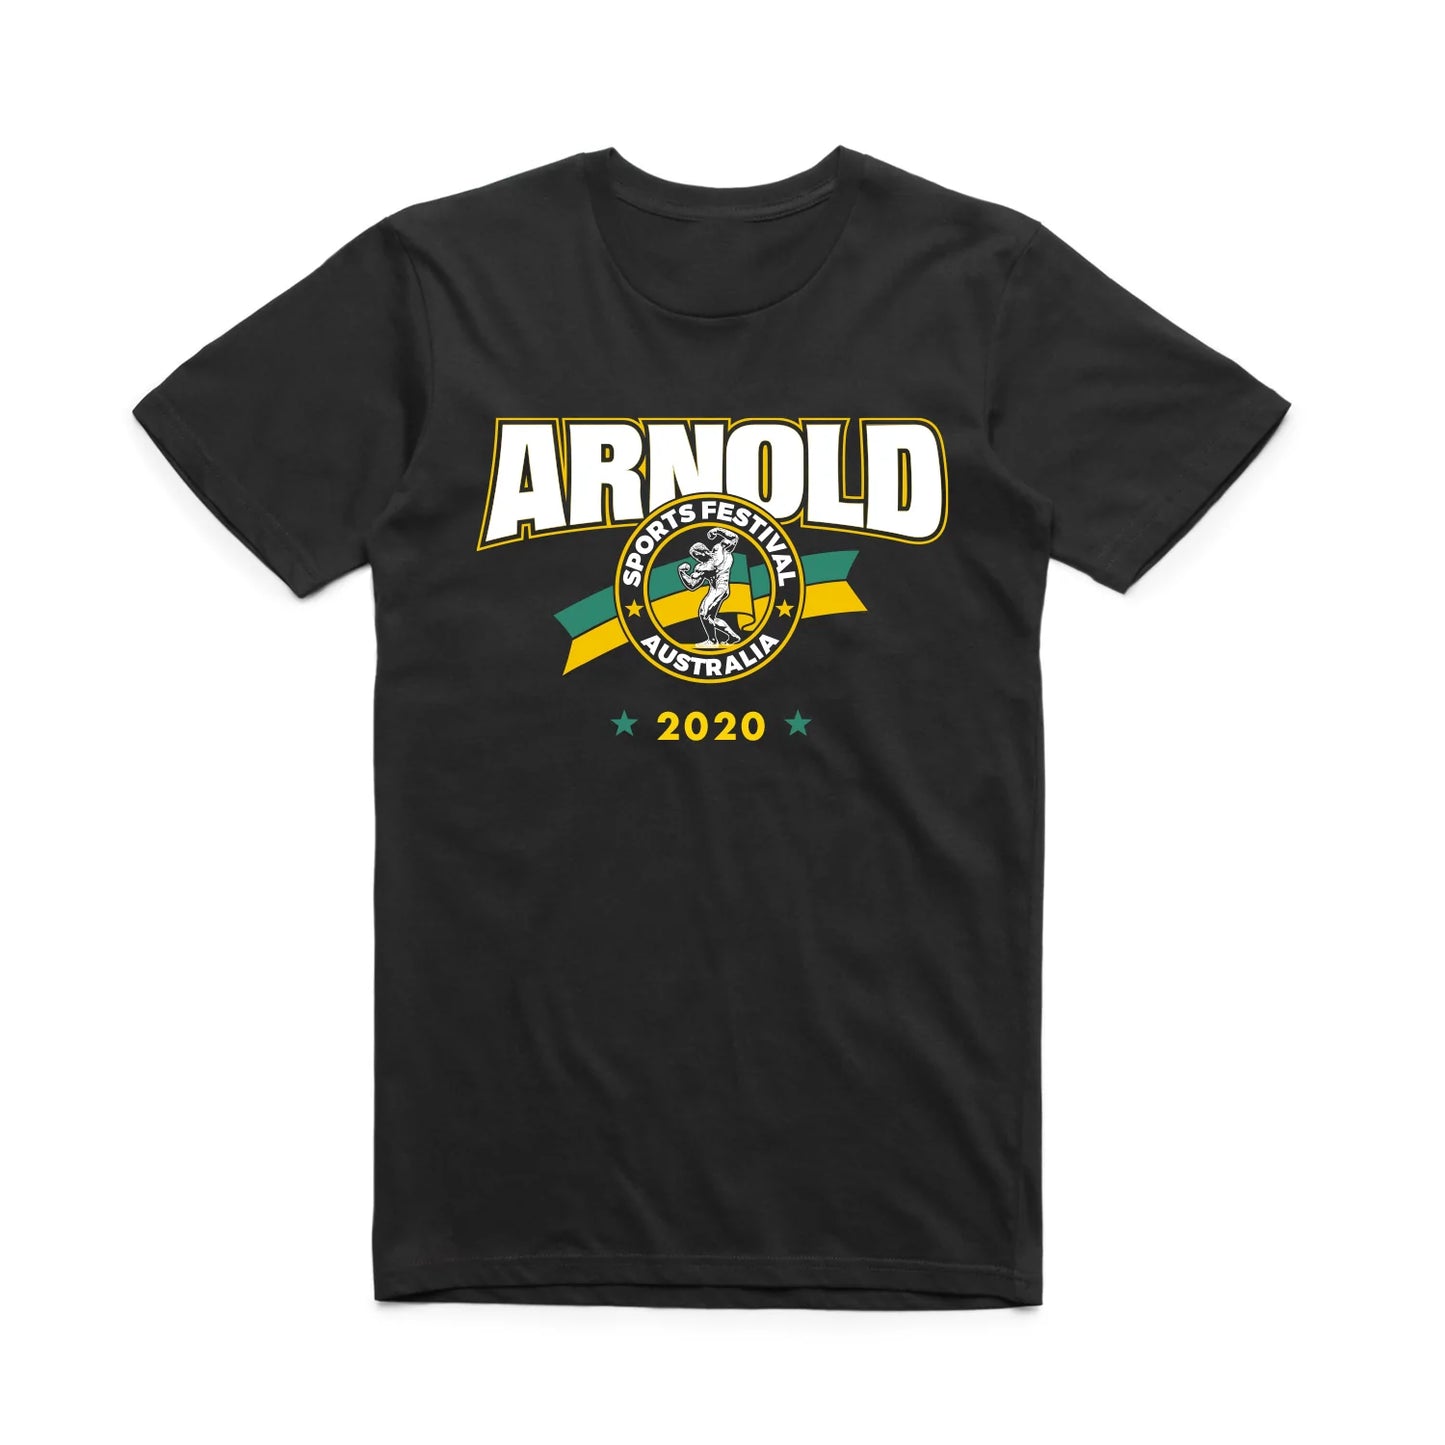 Arnold Event Tee - 2020